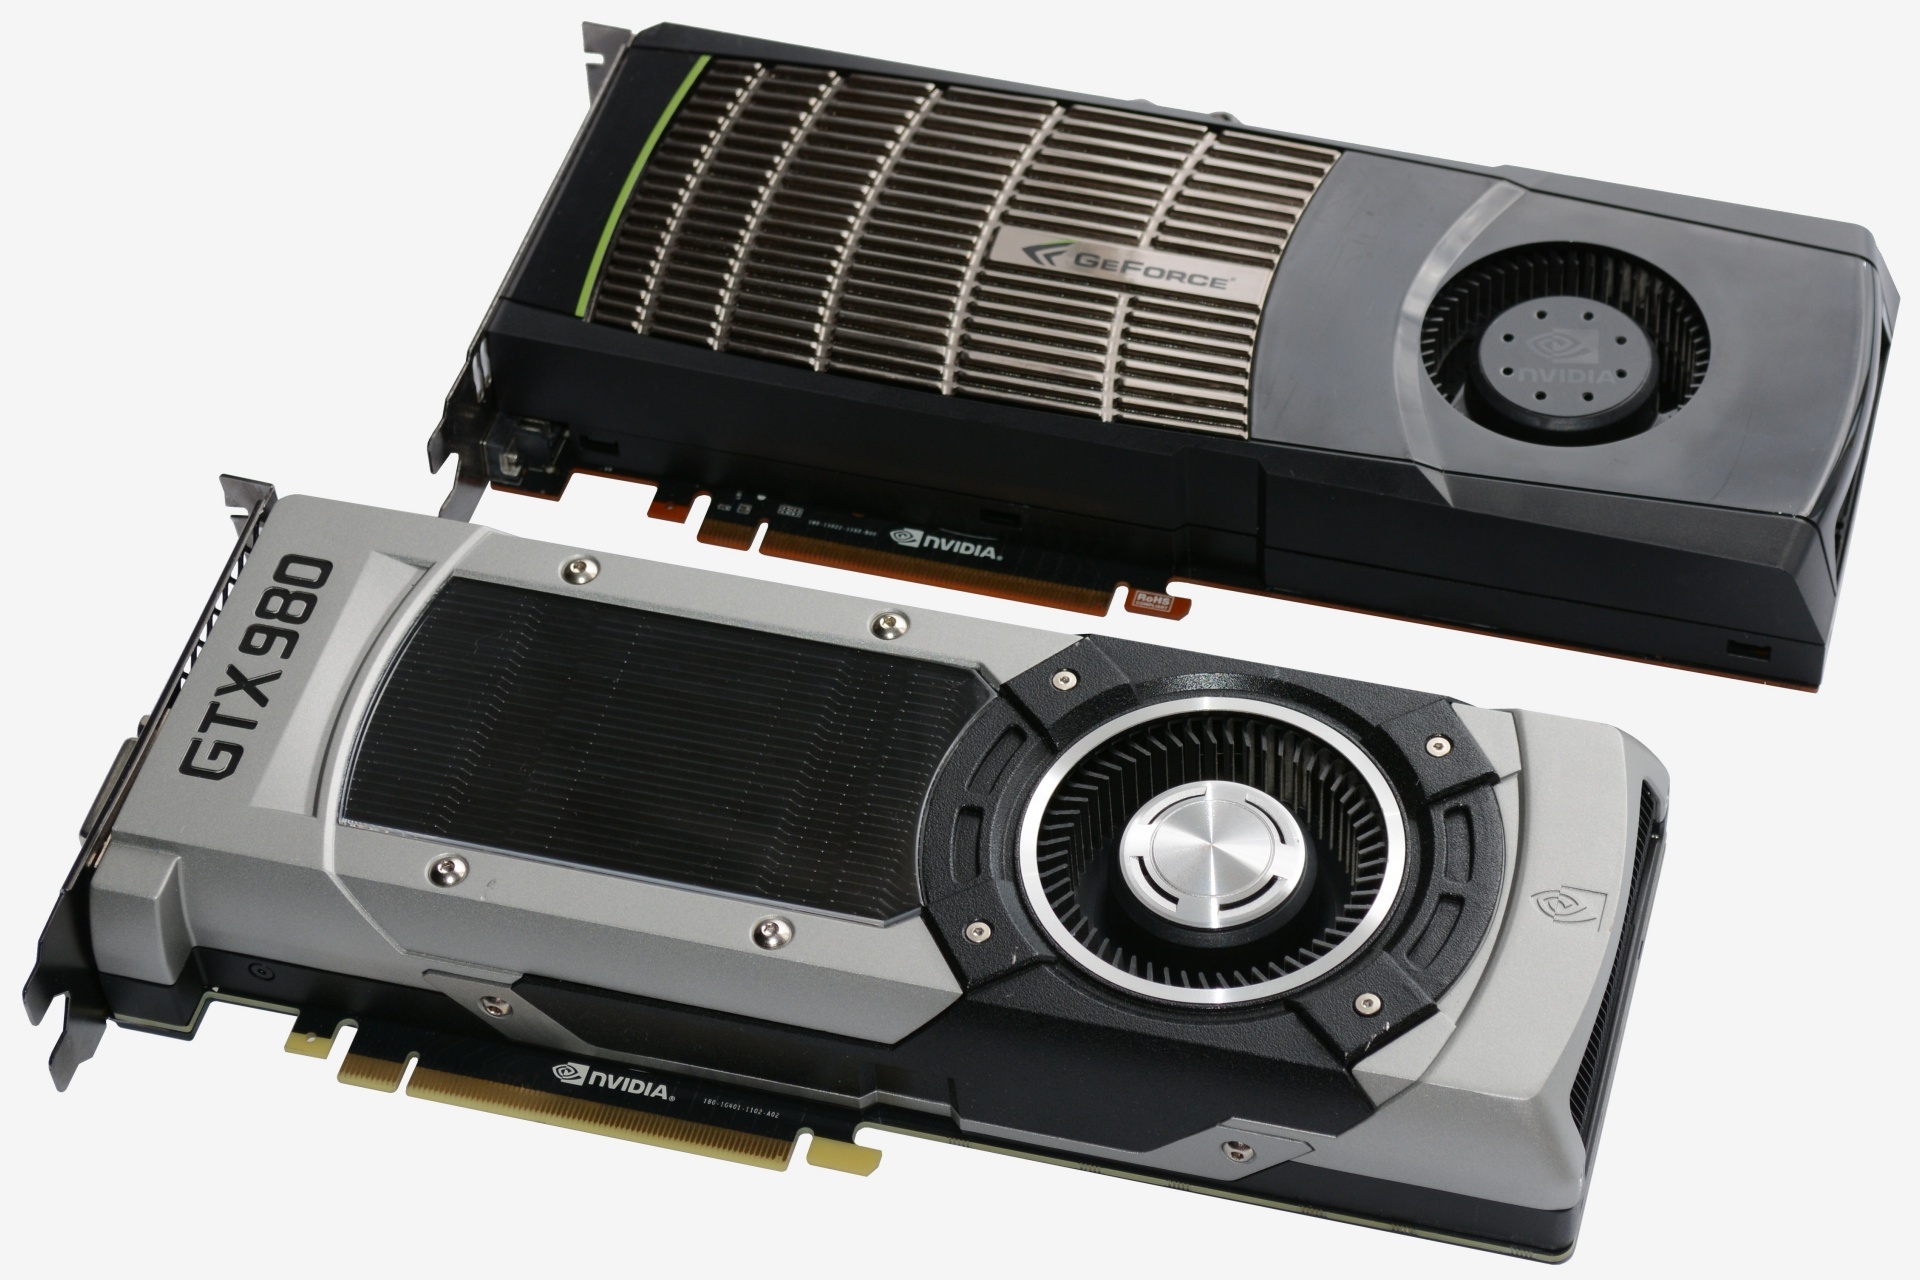 Then And Now: Five Generations Of GeForce Graphics Compared